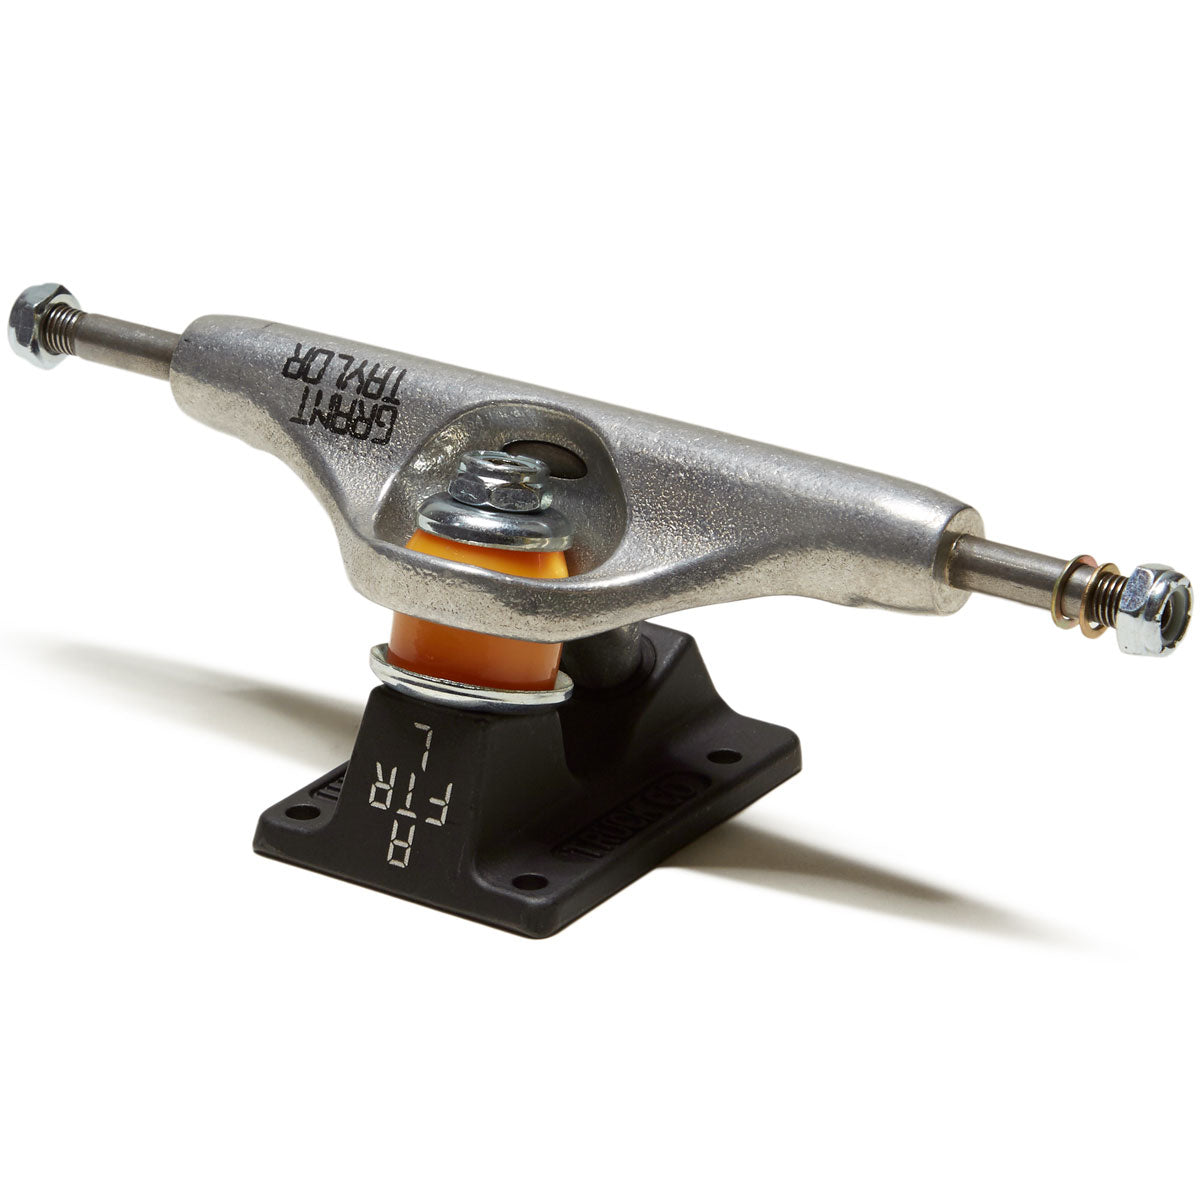 Independent Stage 11 Hollow Grant Taylor Barcode Skateboard Trucks - Silver/Black - 159mm image 2